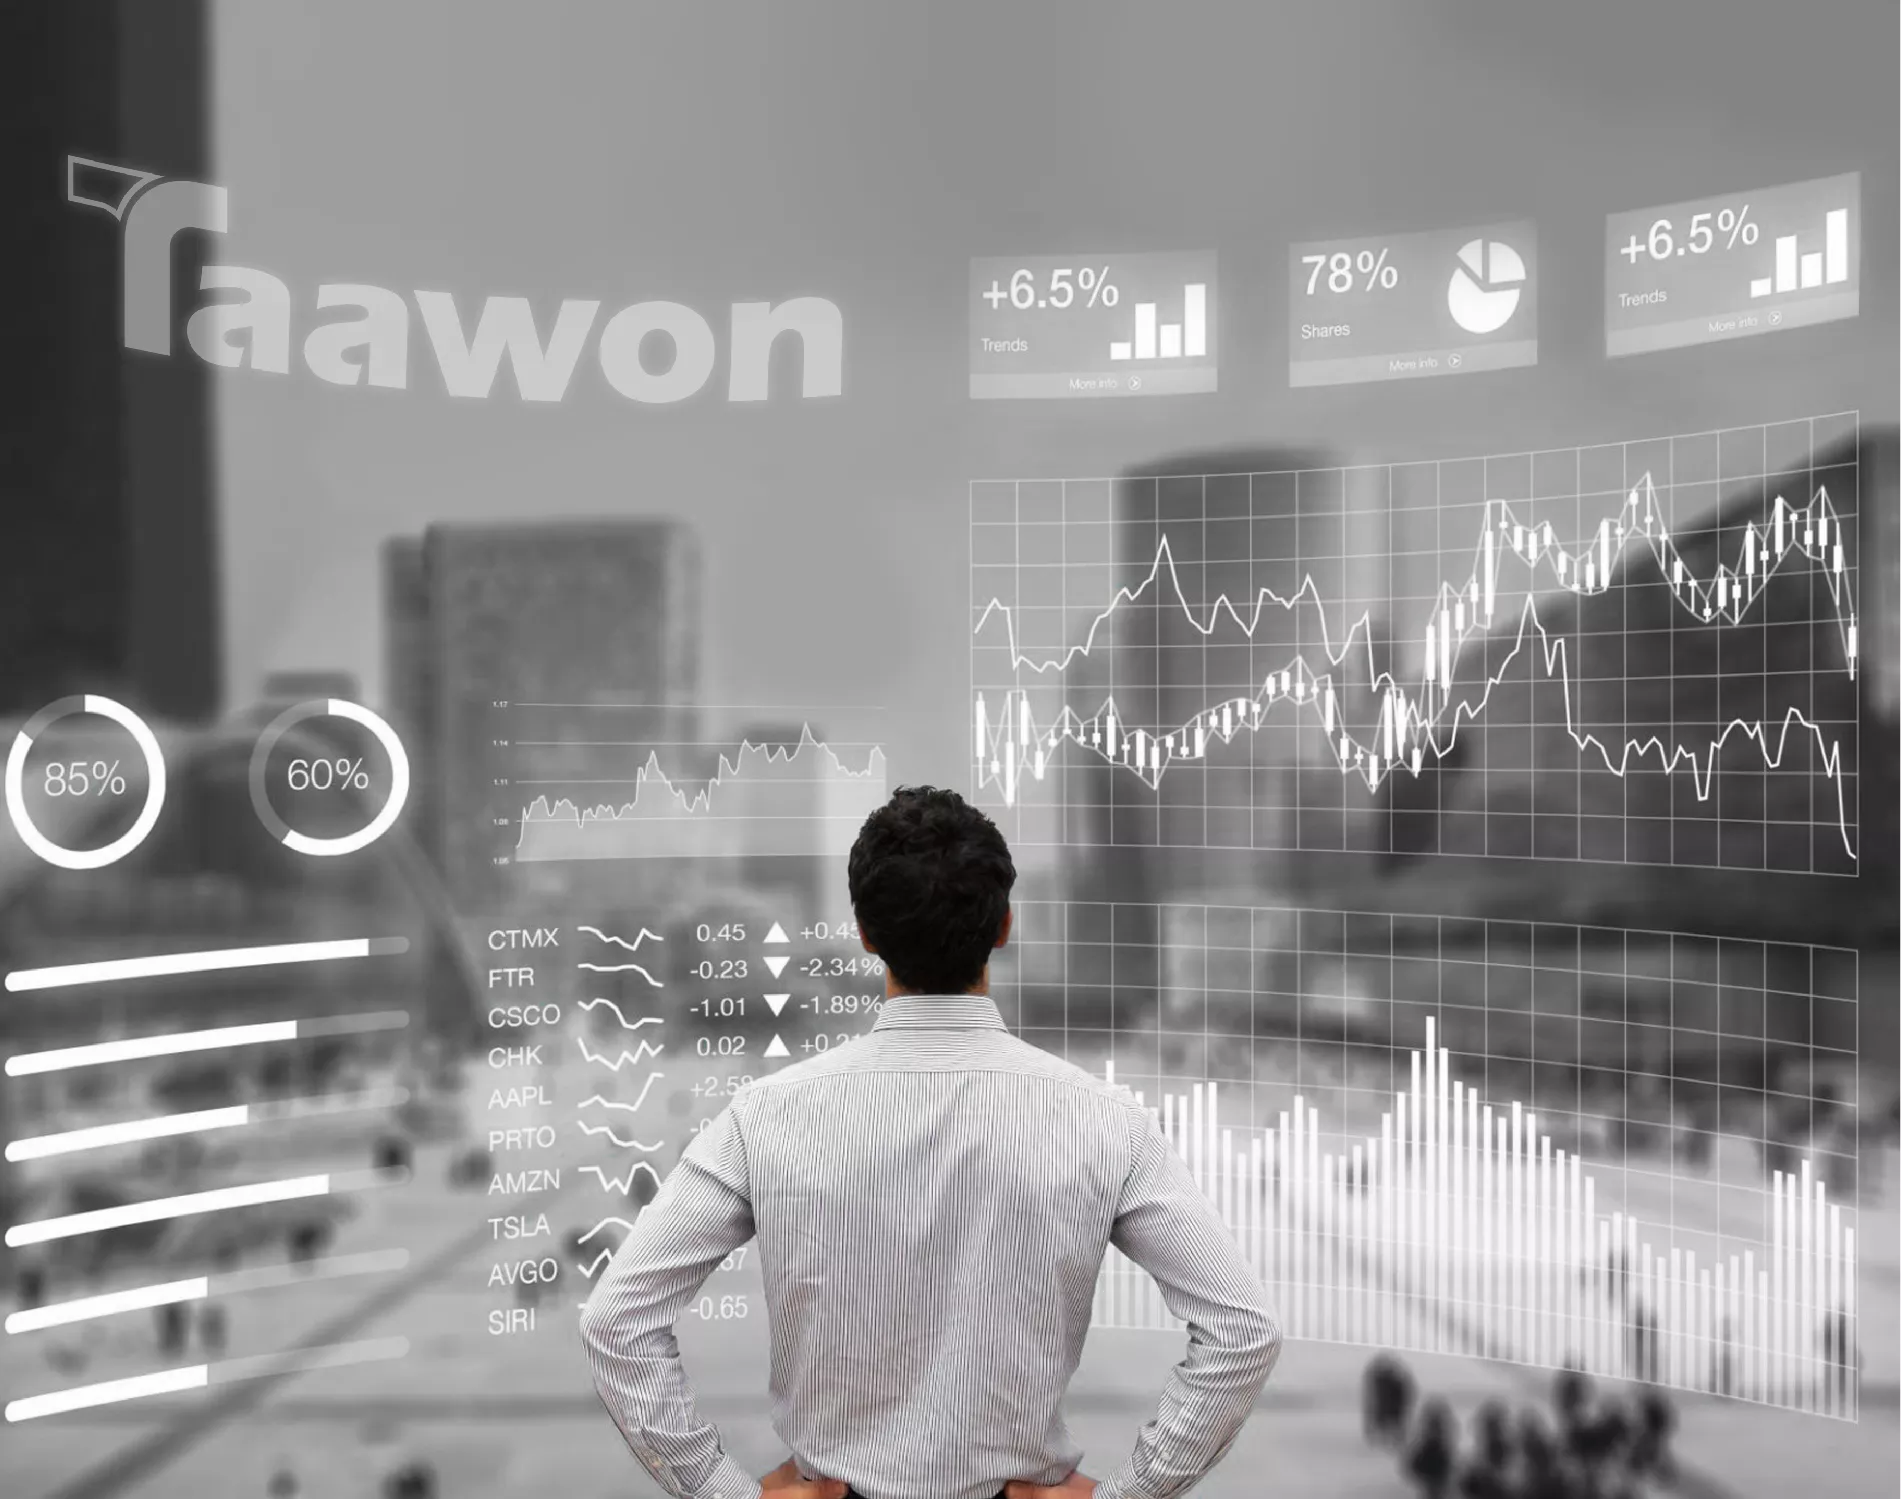 Taawon Group | Strategic Operations